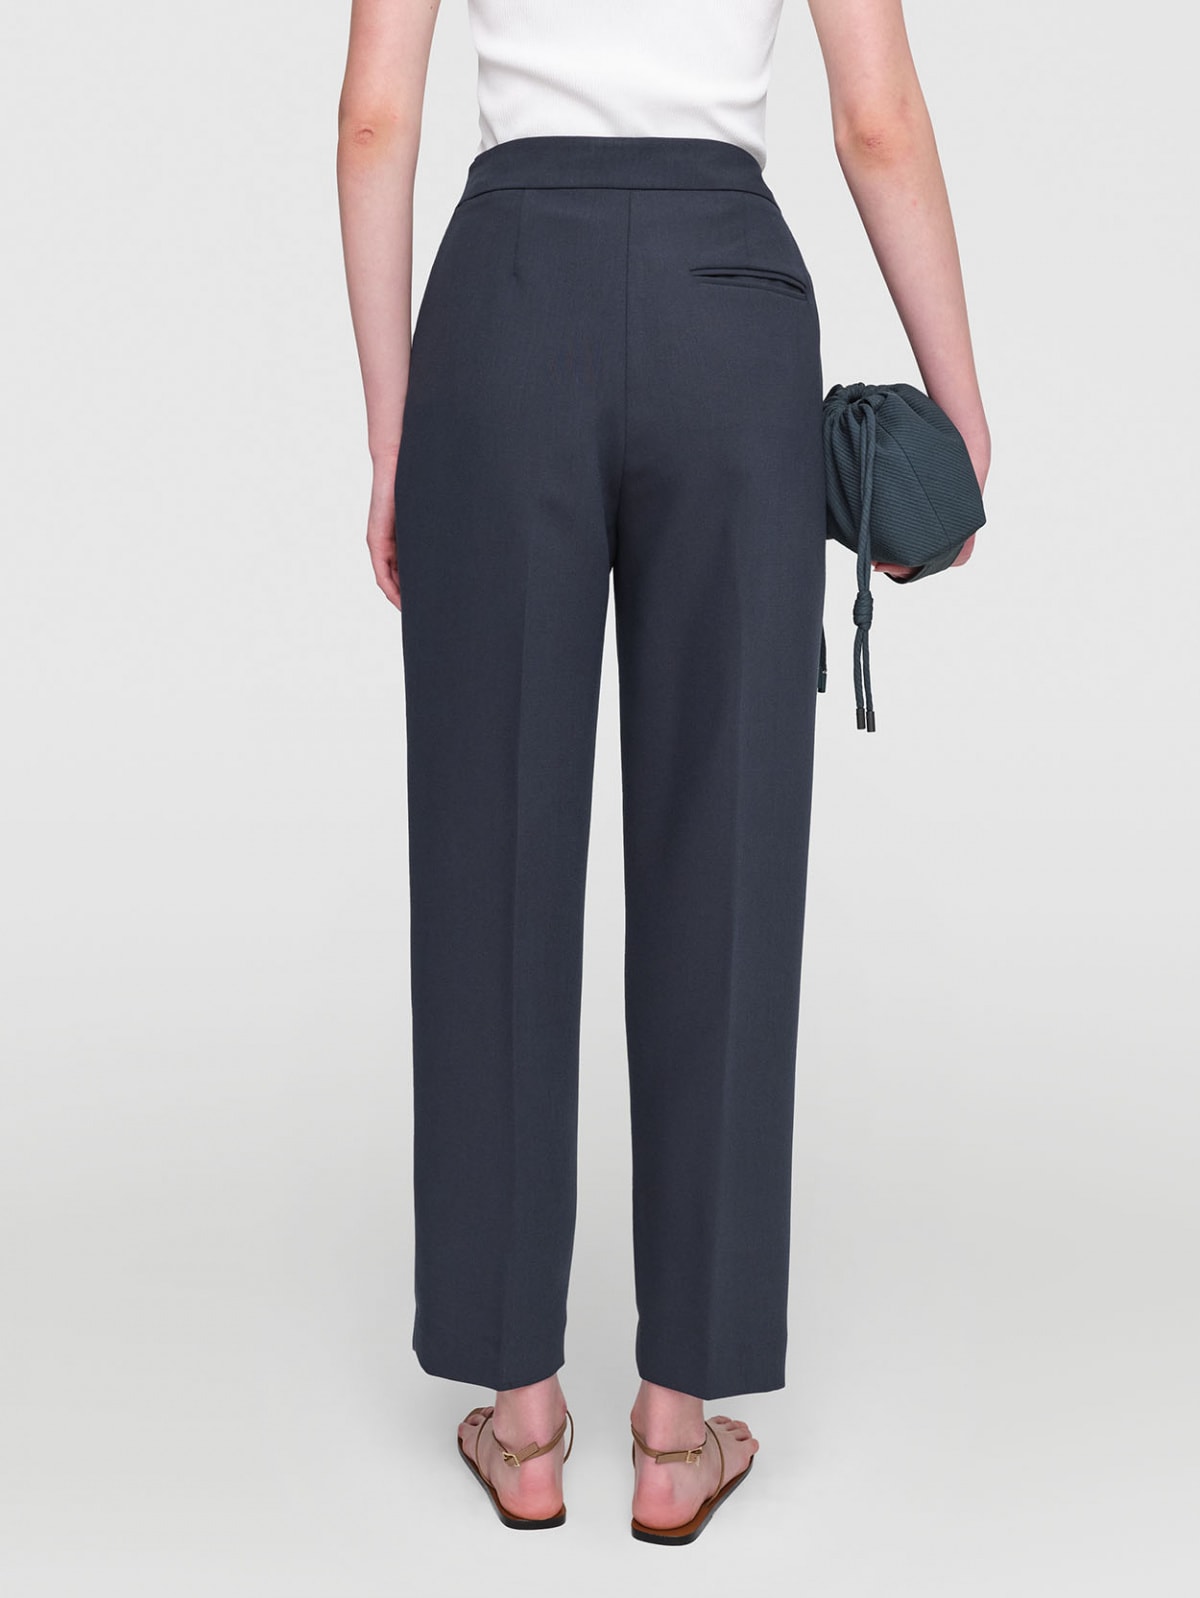 Summer Suiting  Pippa  Crop Pants  4